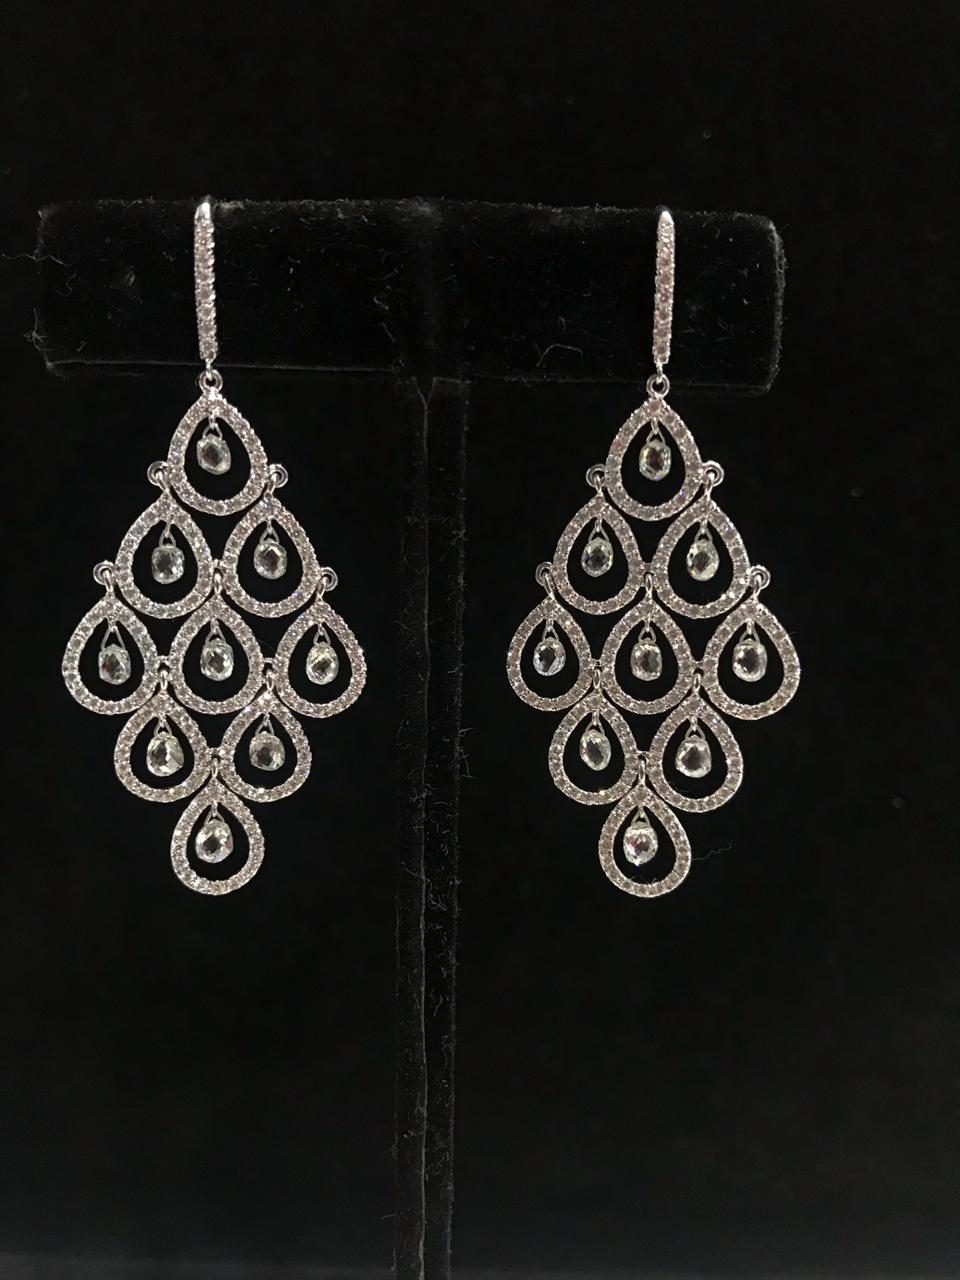 PANIM Cocktail Diamond Dangling Earrings 18 Karat White Gold, 6.23cts

Diamond drop earrings in cut down style settings, with 12 briolette cut diamonds and small round brilliant cut diamonds. Each drop shape diamond weighing approximately 0.25